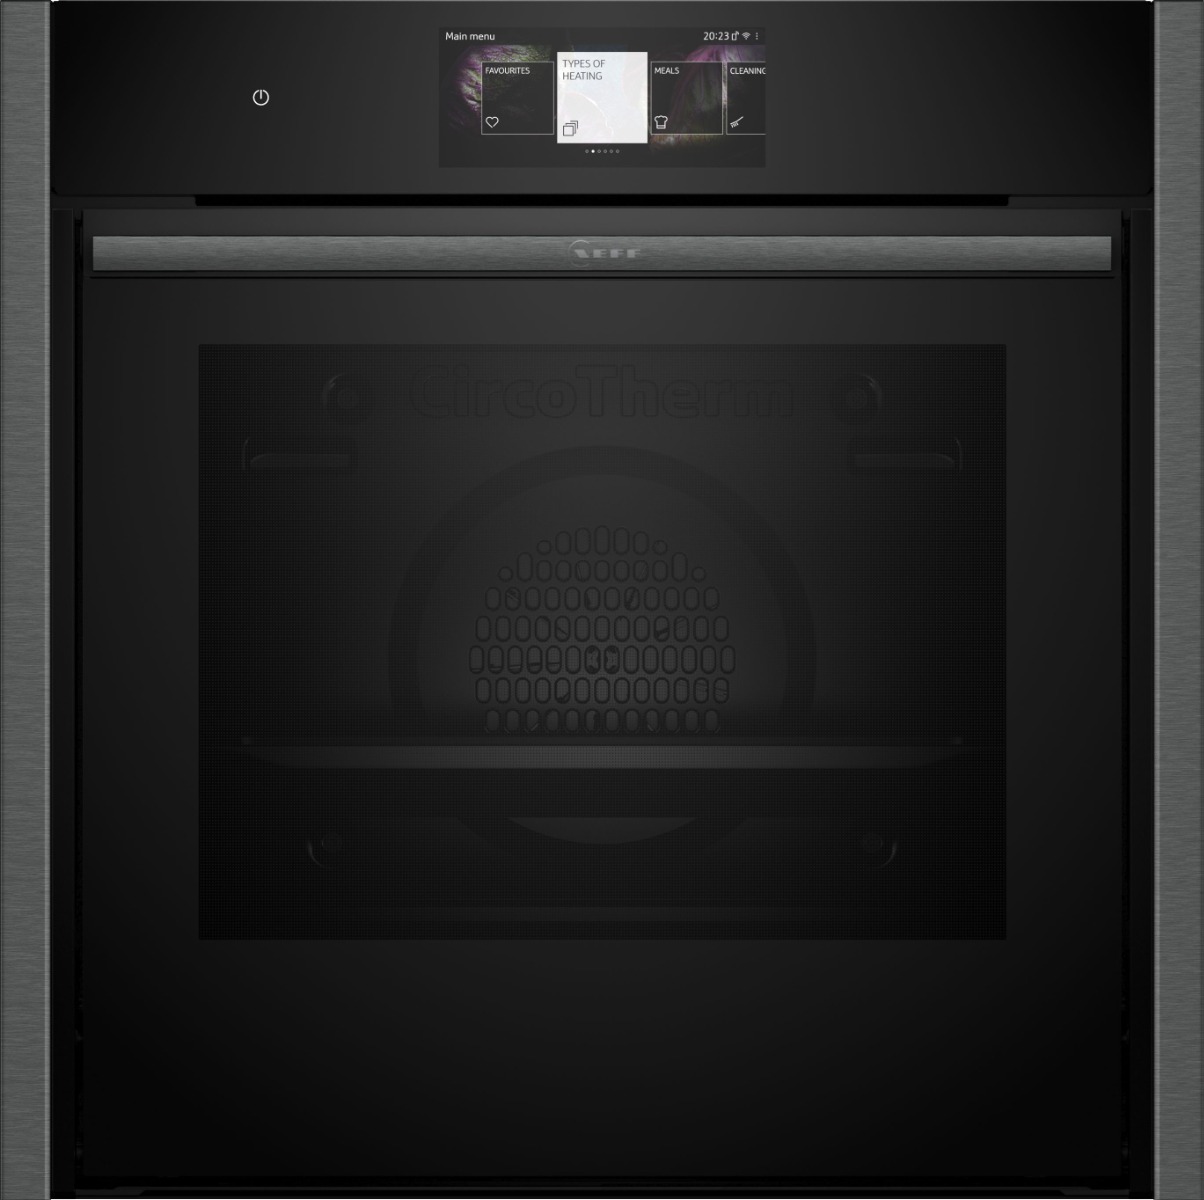 Neff B64CT73G0B Built-In Slide and Hide Single Pyrolytic Oven - Black with Graphite-Grey Trim